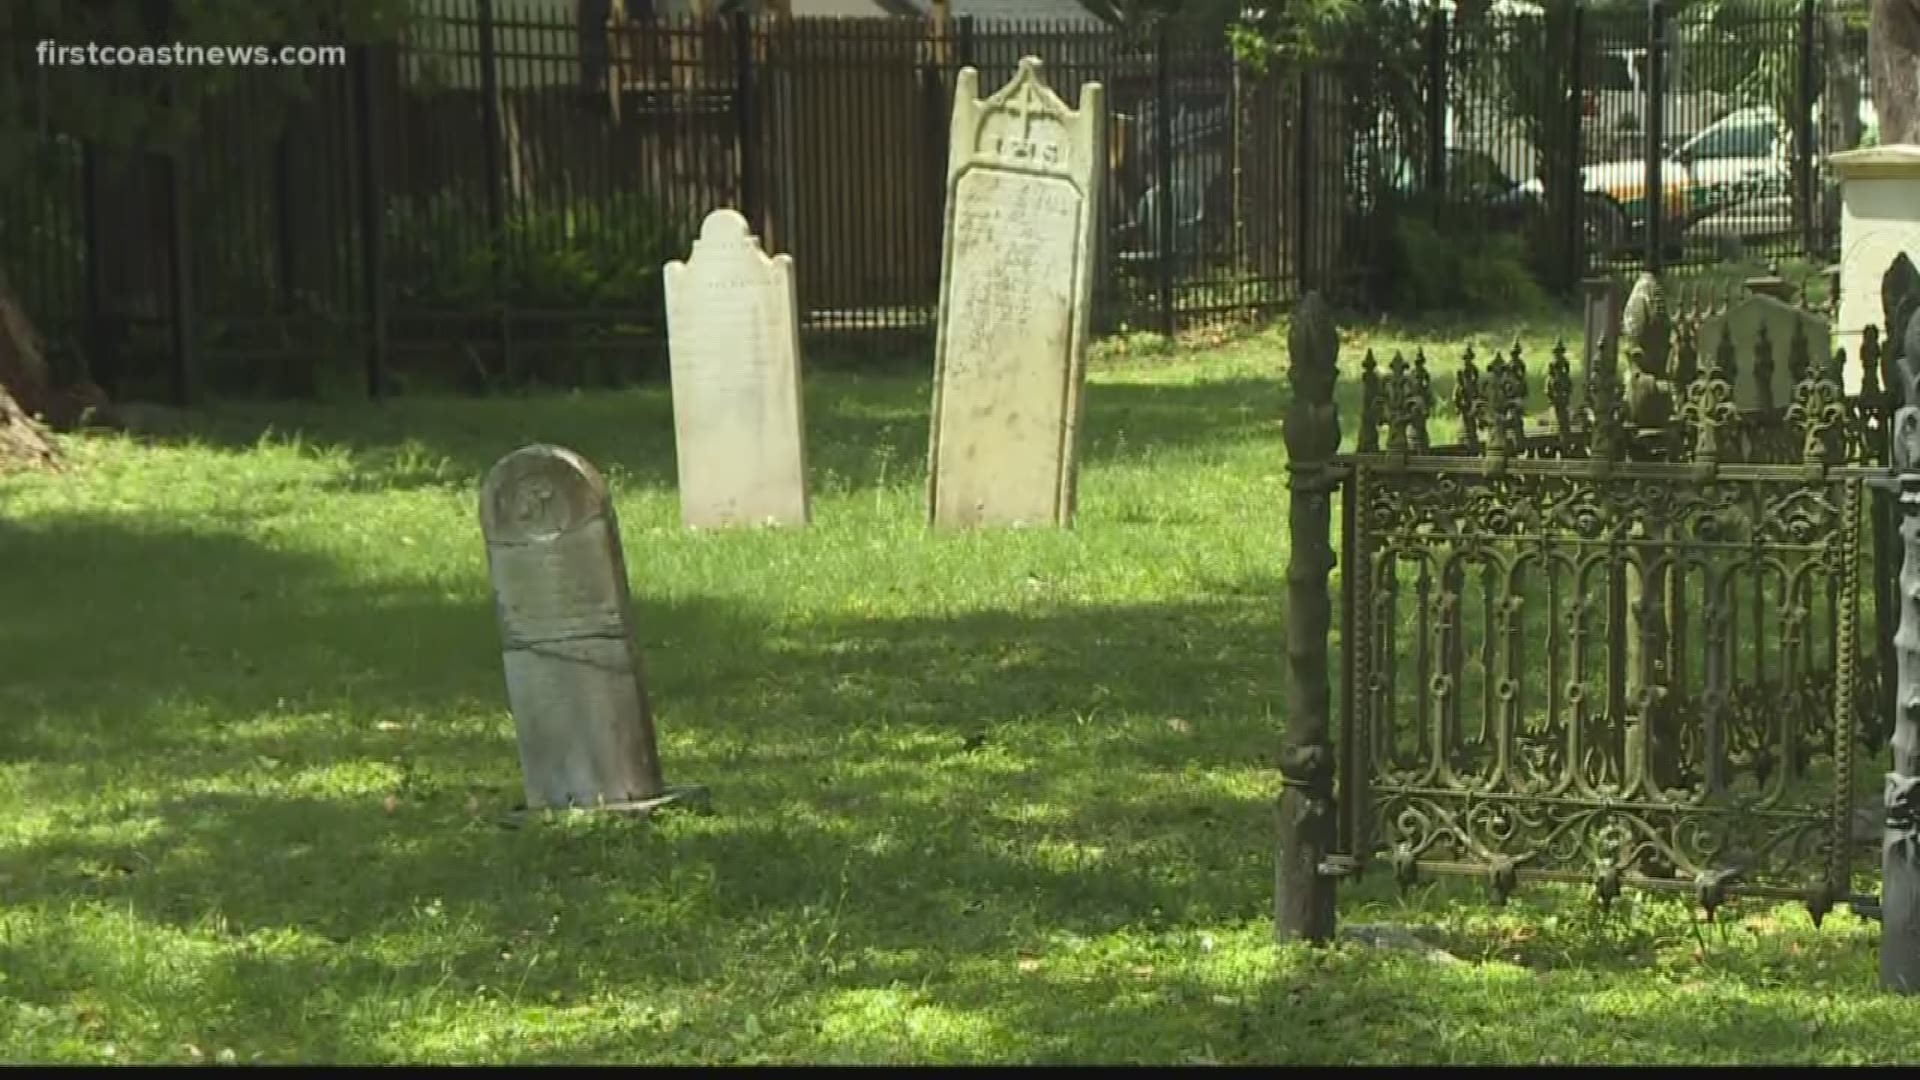 One of the oldest cemeteries in Florida is getting some T-L-C.